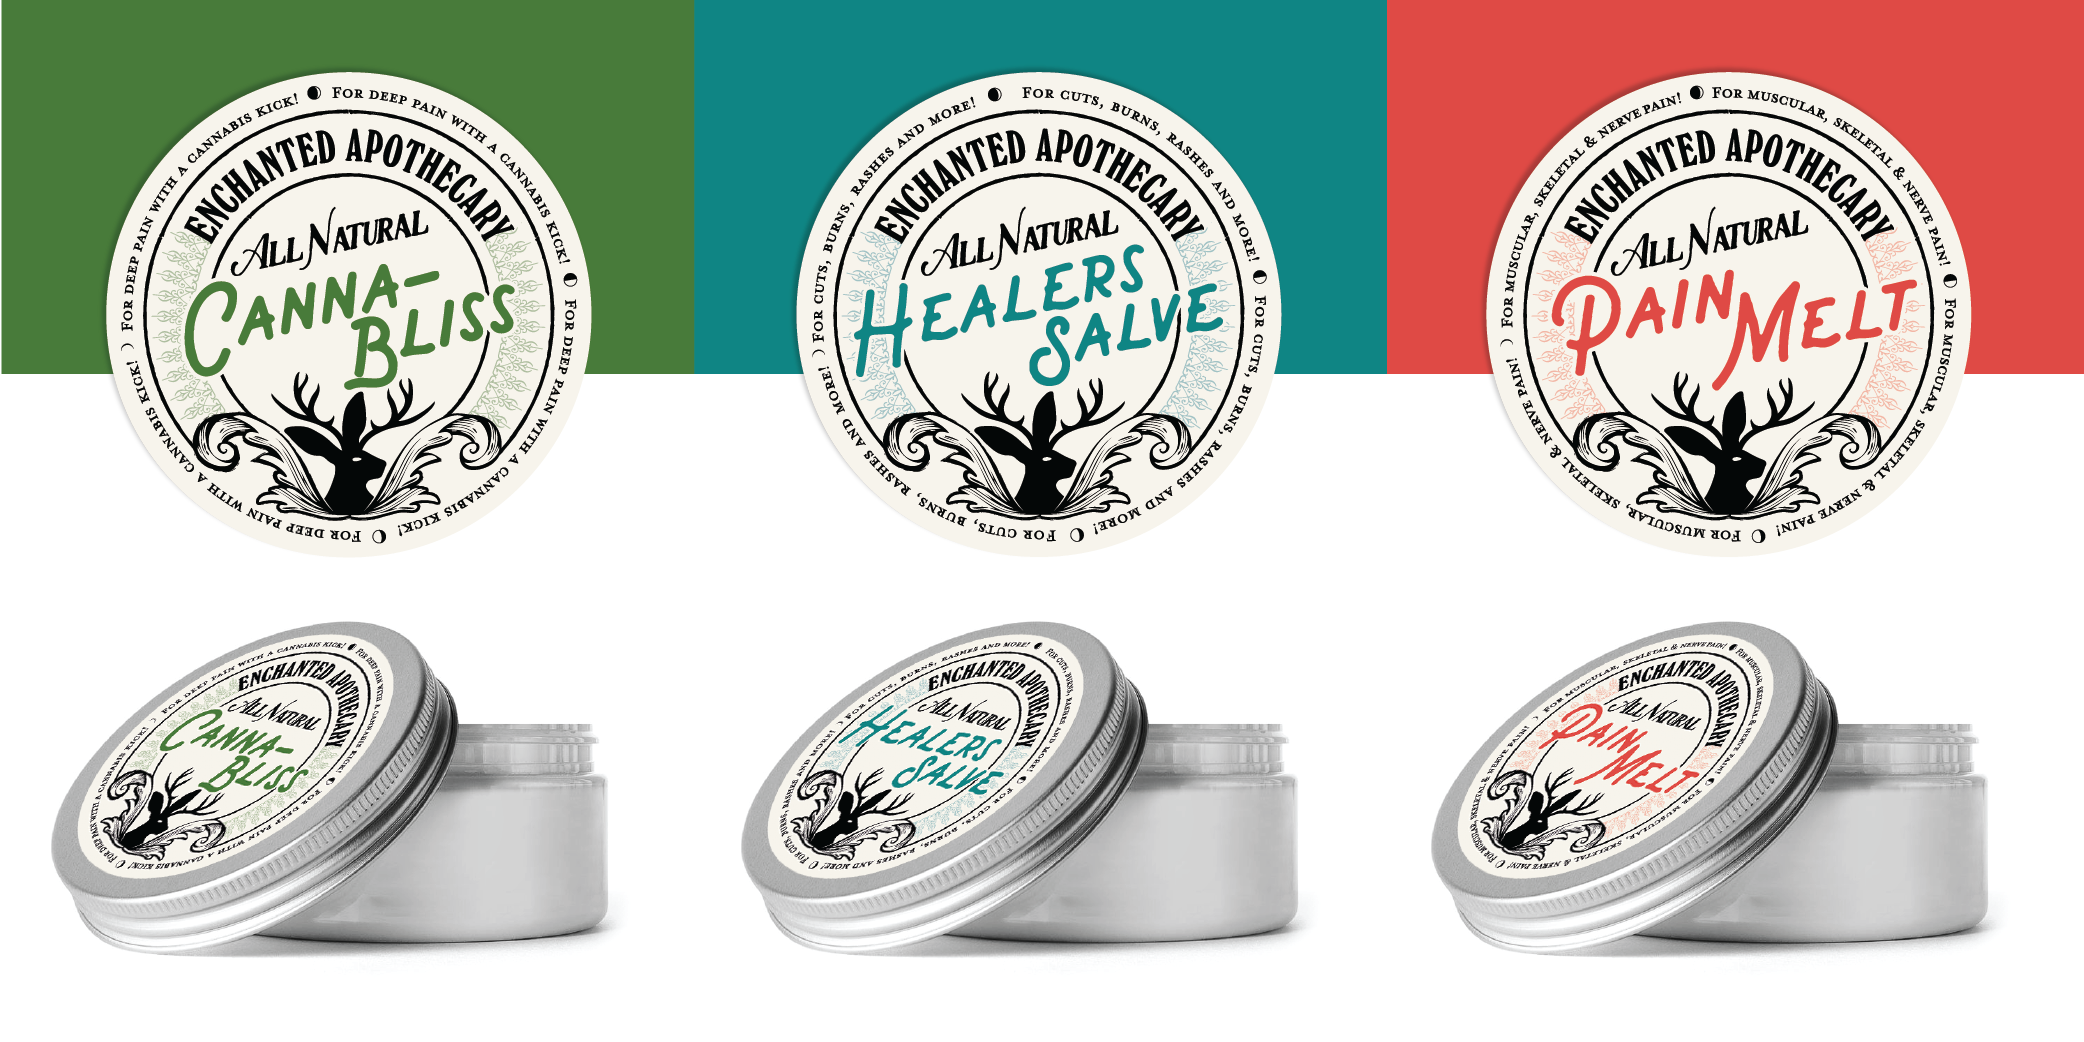 Images of aromatherapy salves from Enchanted Apothecary. Designed by Fingers Duke.